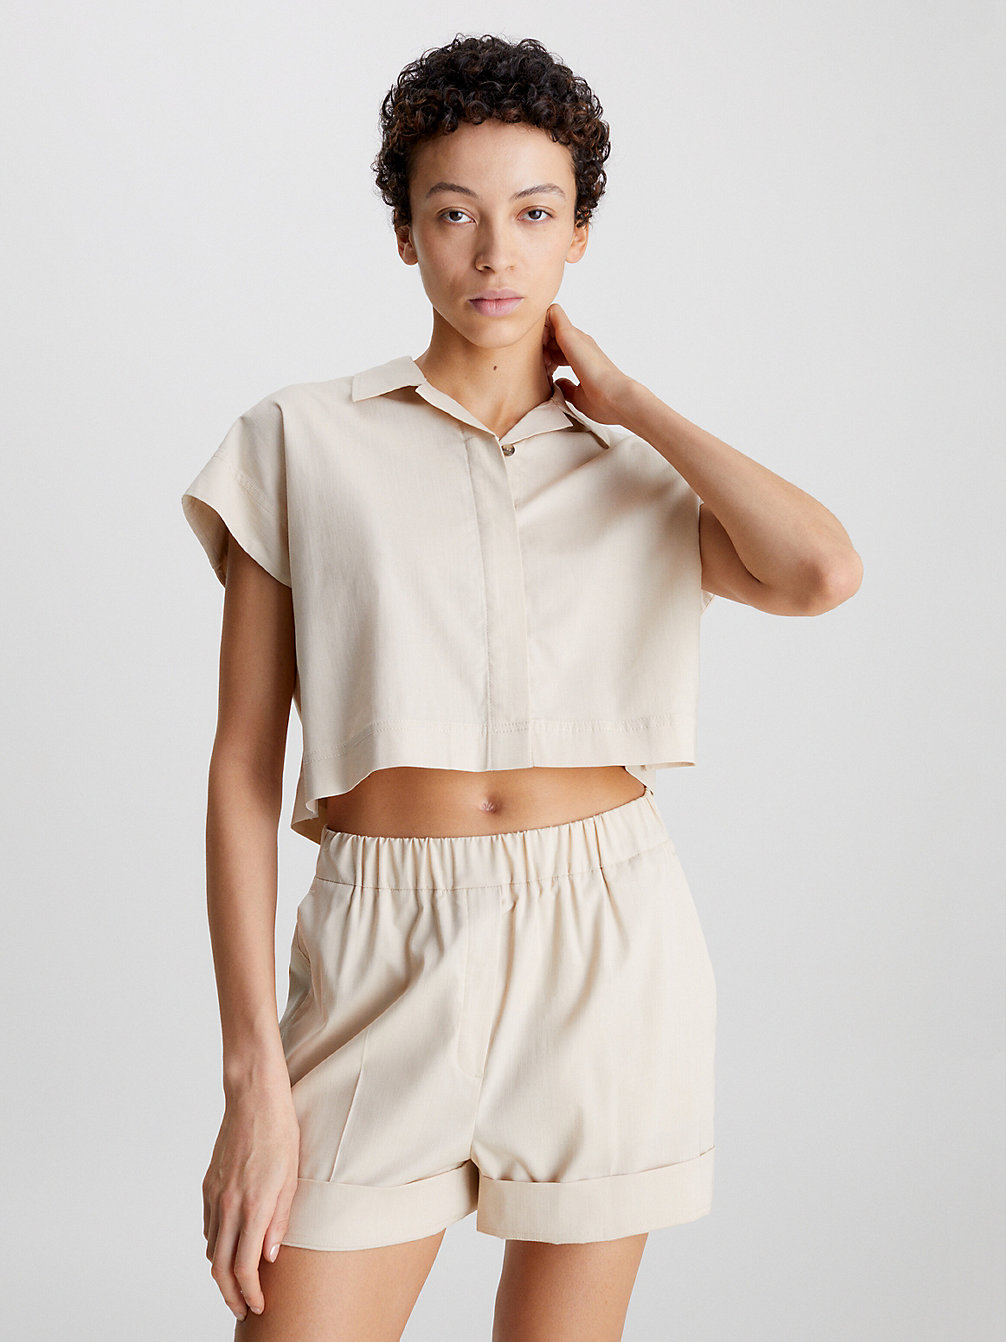 Camisa Holgada Cropped De Lyocell > WHITE CLAY > undefined mujer > Calvin Klein